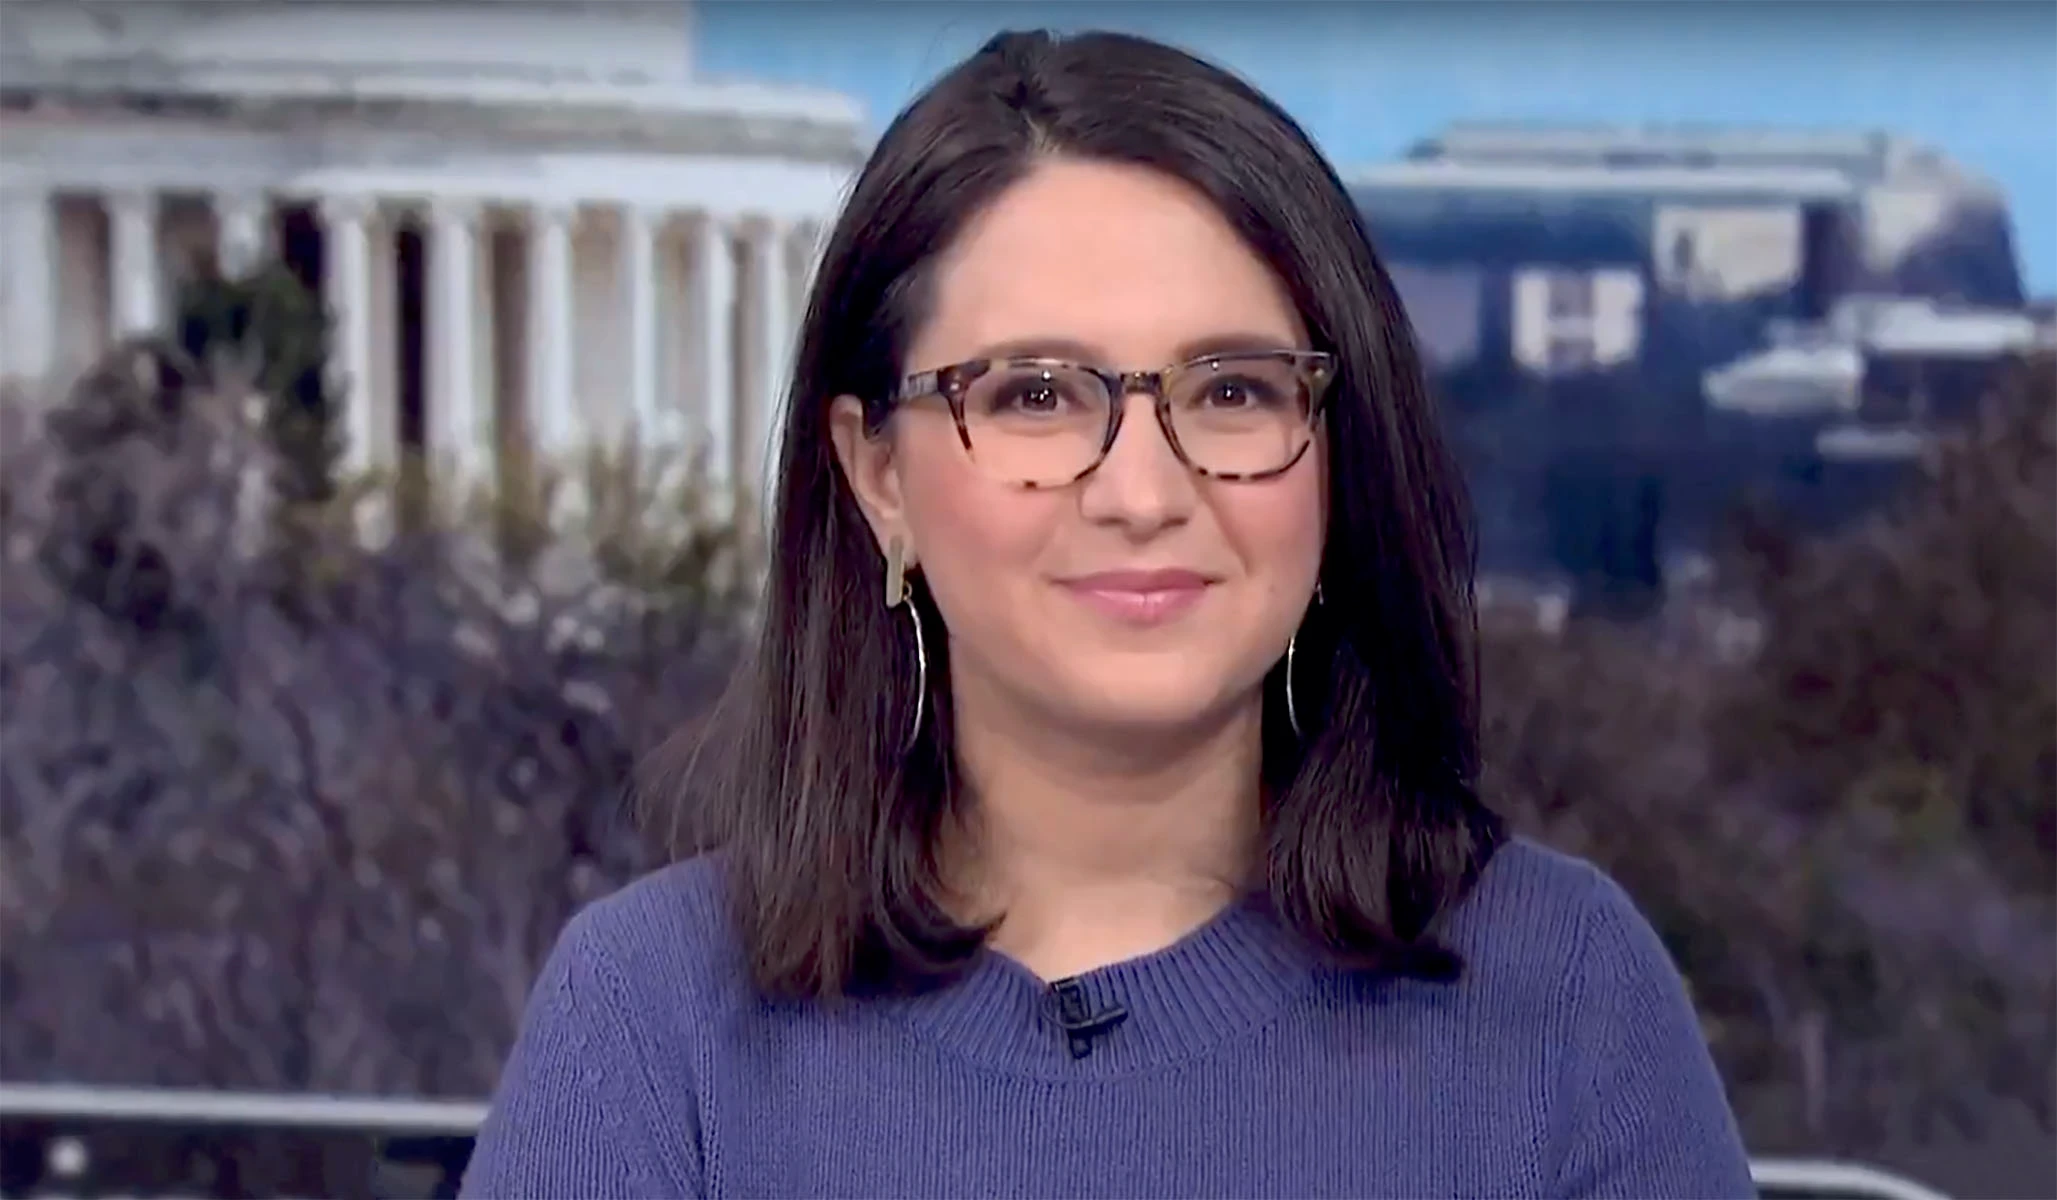 Bari Weiss is an American Journalist and New York Times columnist